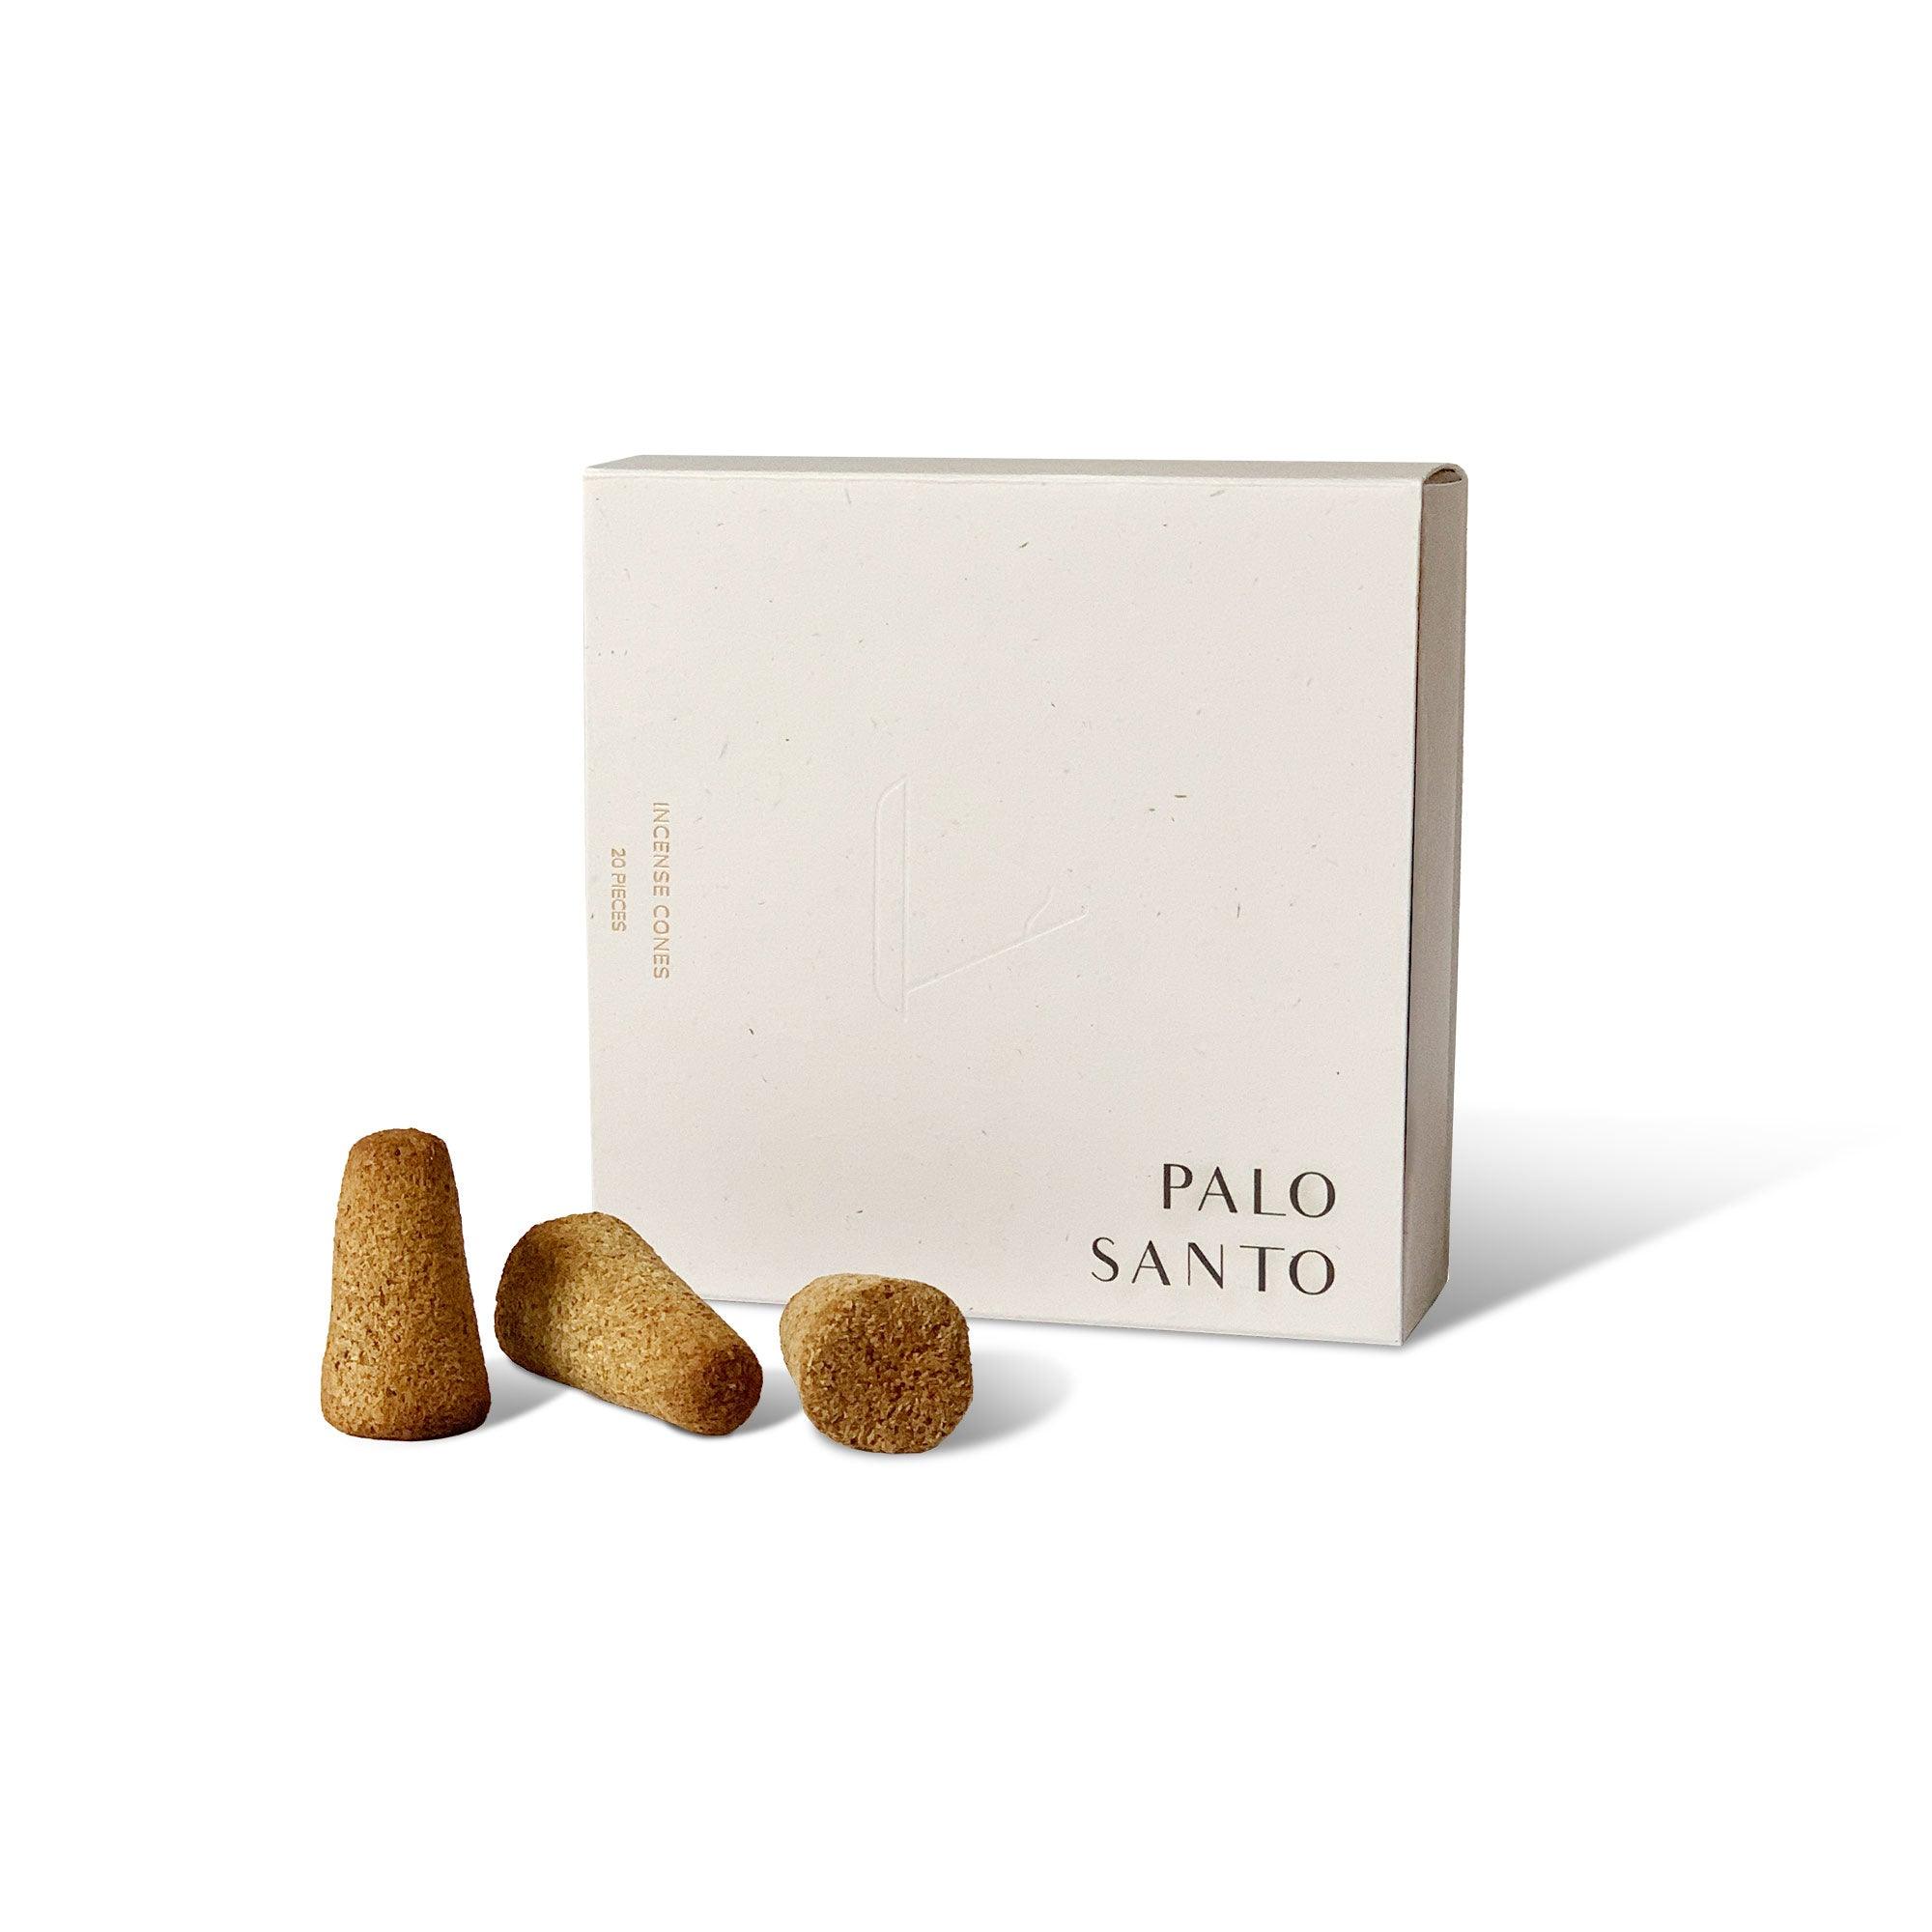 3 pieces of palo santo incense cones and the package